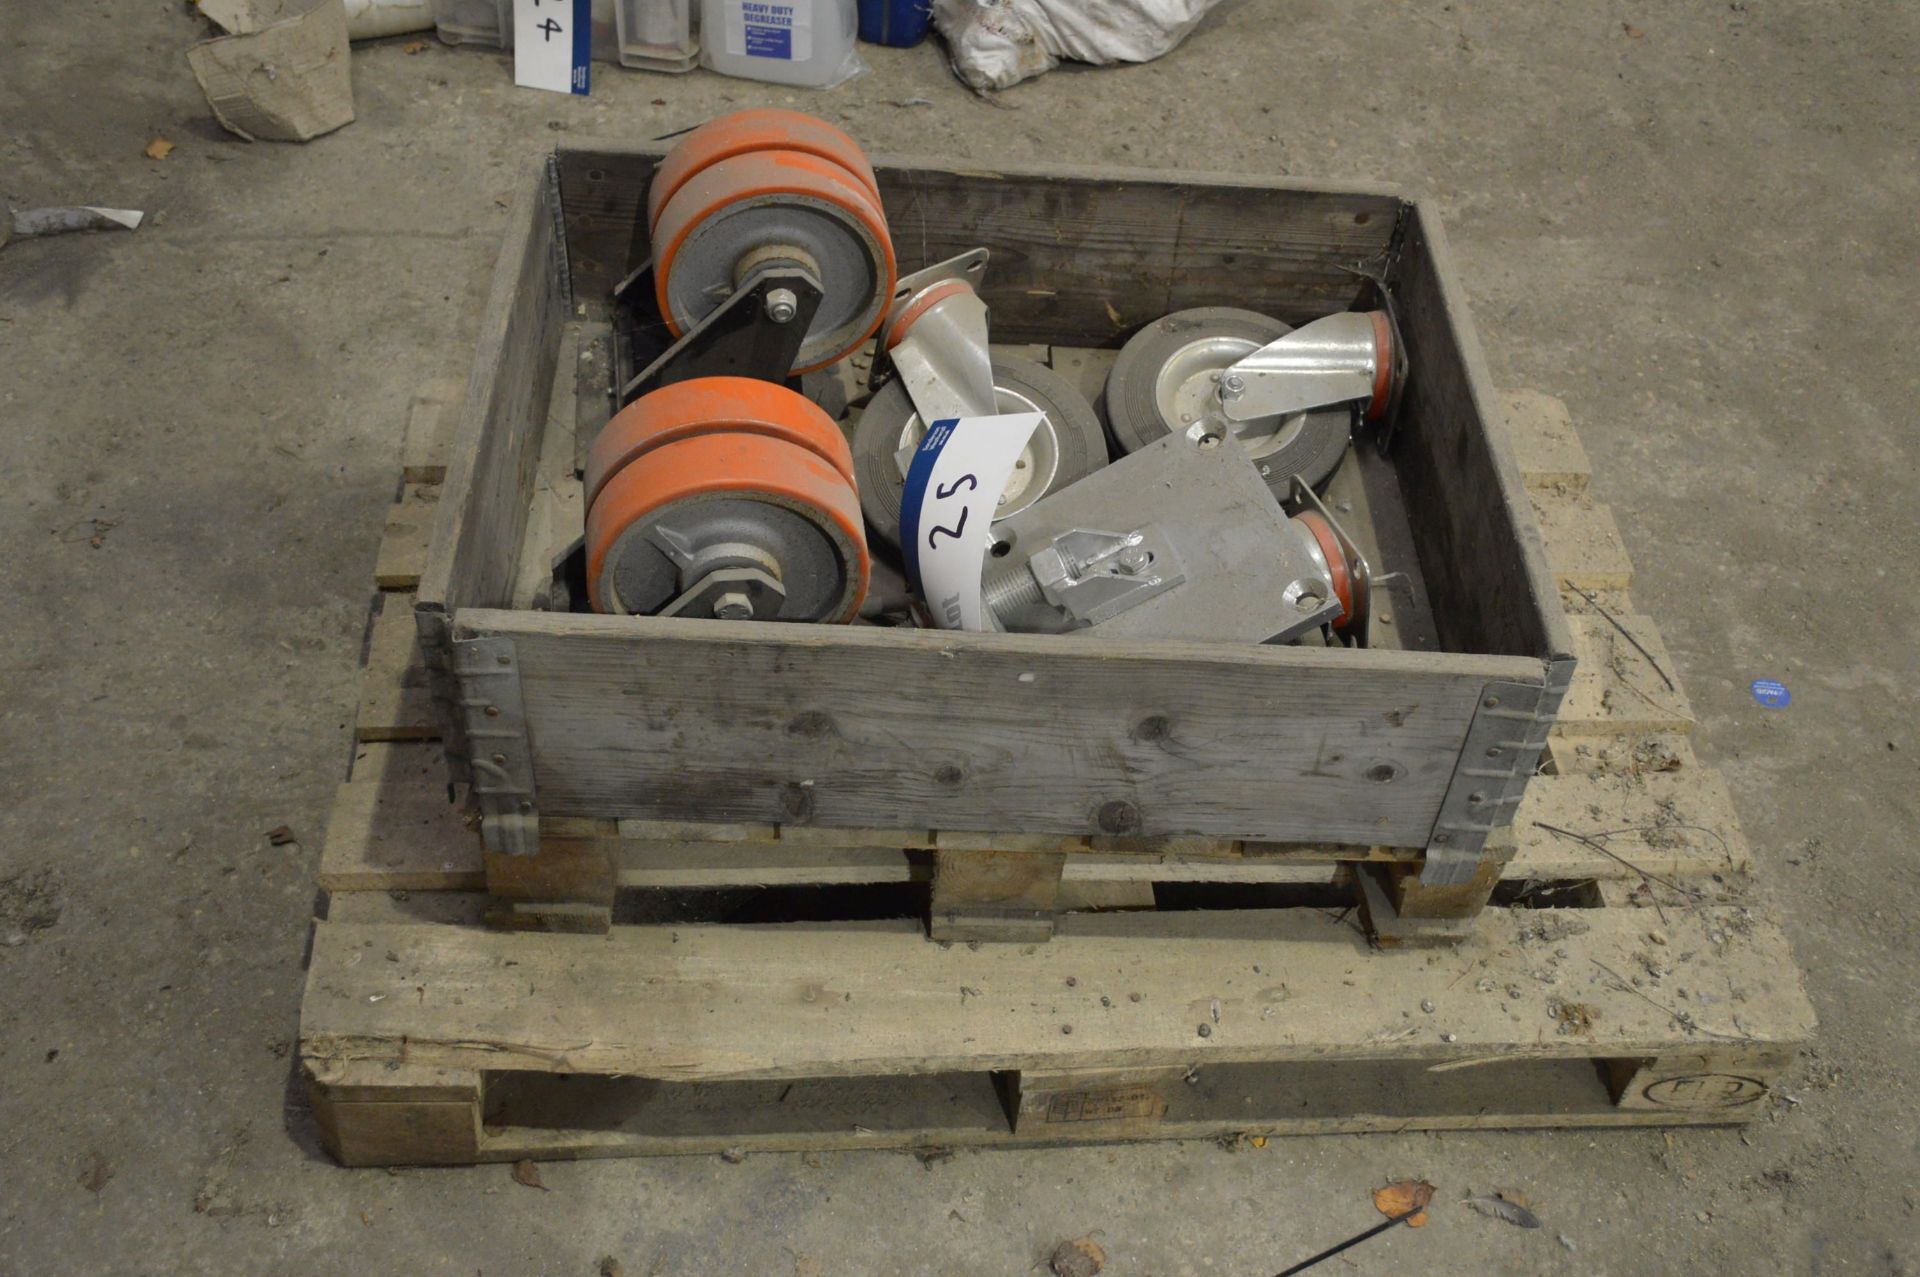 Assorted Casters and Equipment, on one pallet